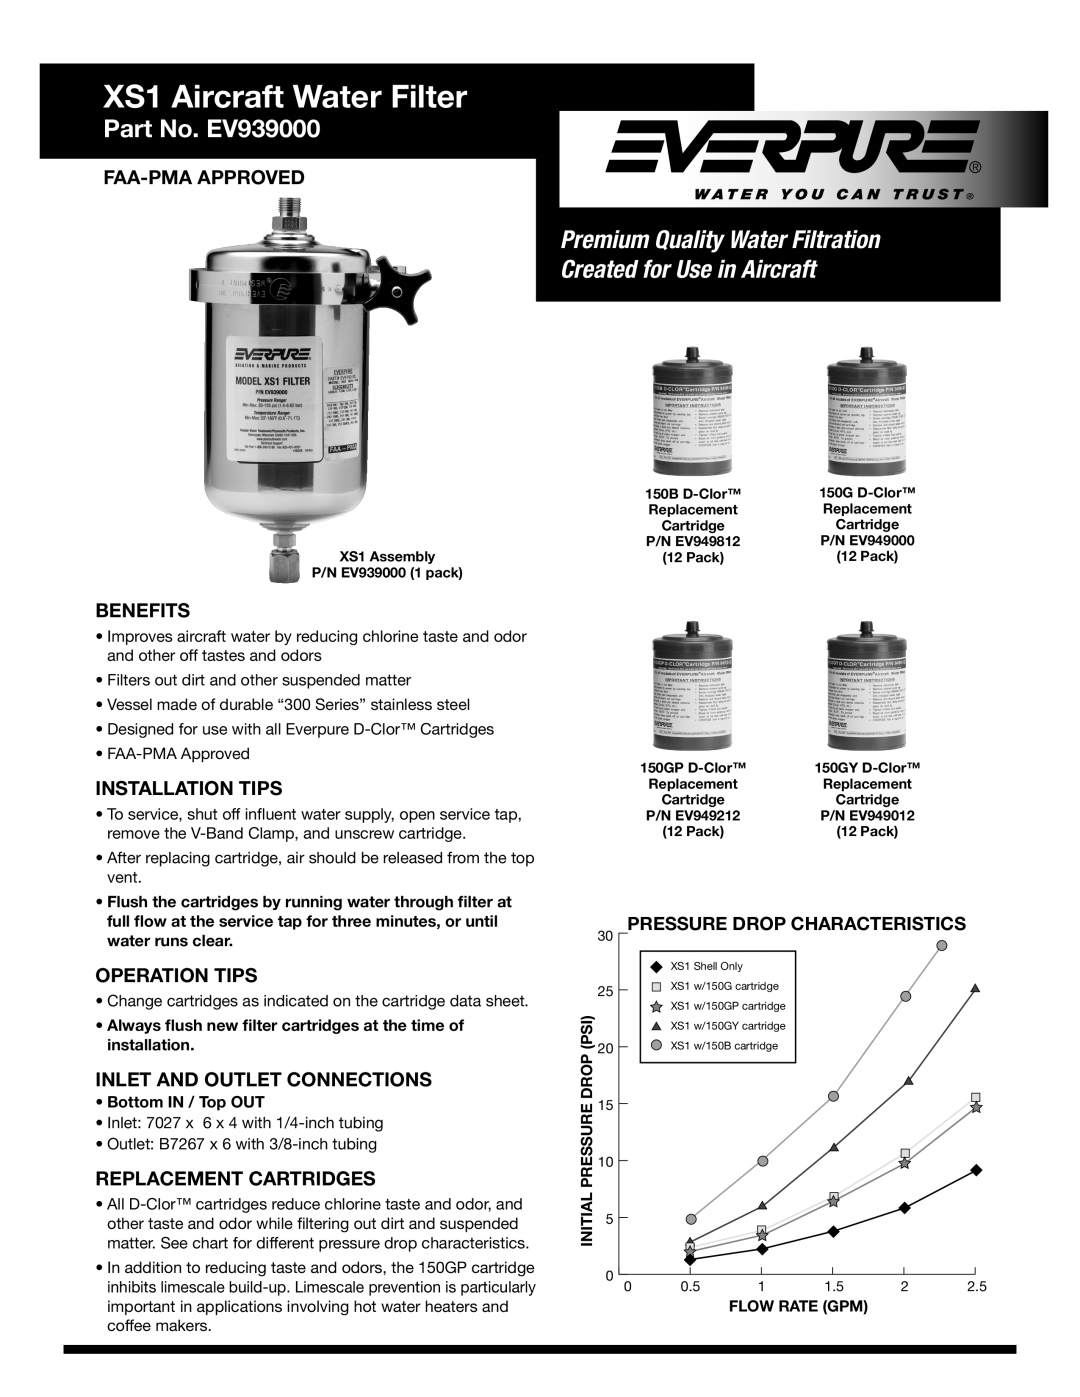 Everpure manual XS1 Aircraft Water Filter, Part No. EV939000, Faa-Pma Approved, Benefits, Installation Tips, Drop 